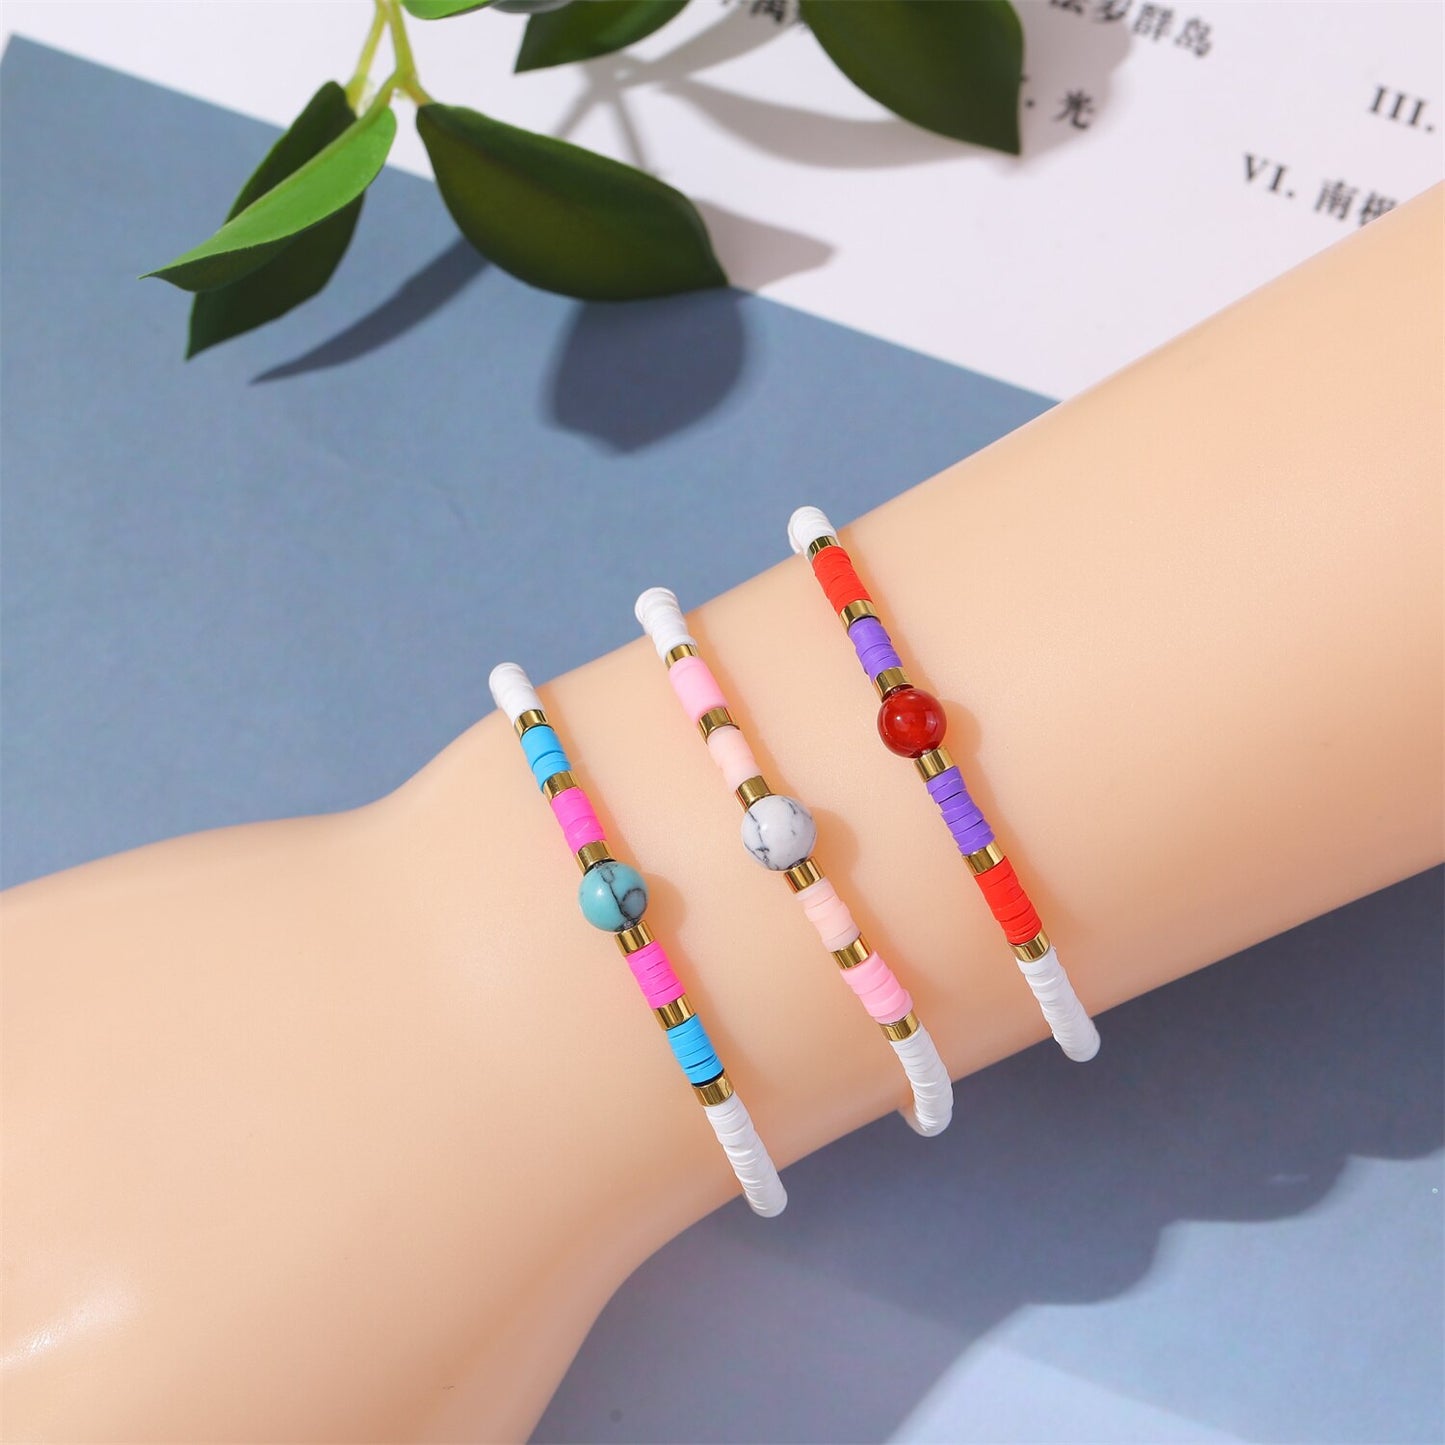 12pcs Surfer Clay Stone Bead Bracelet Polymer Beaded Stackable Stretch Bracelet Bohemia Aesthetic Summer Beach Jewelry for Women